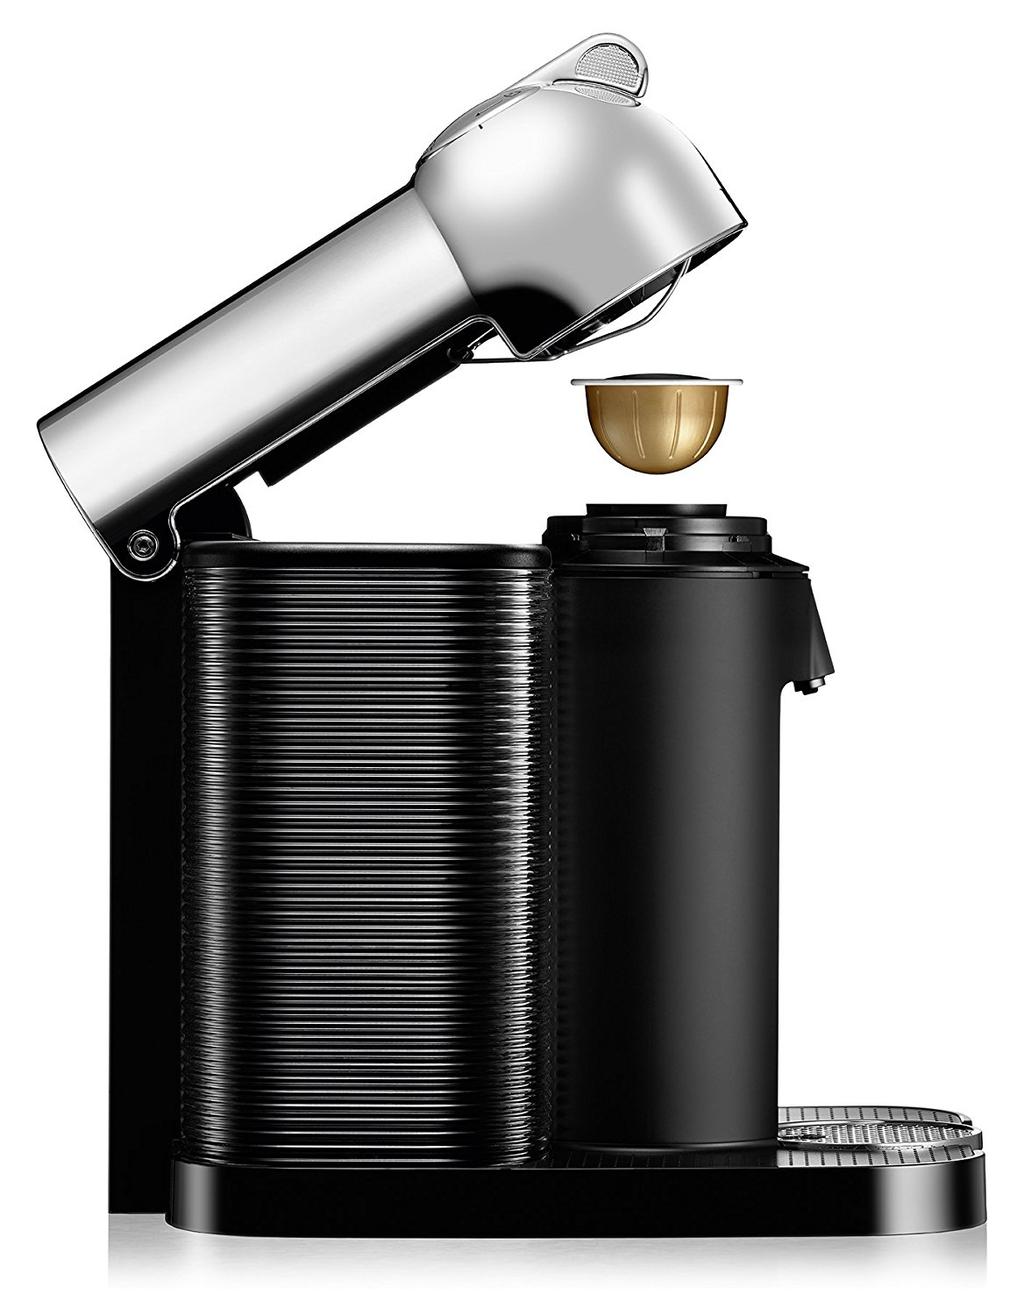 The single touch button mechanism delivers the best in-cup result for whatever style coffee or espresso drink you choose. Designed for use with Nespresso Vertuo capsules only.